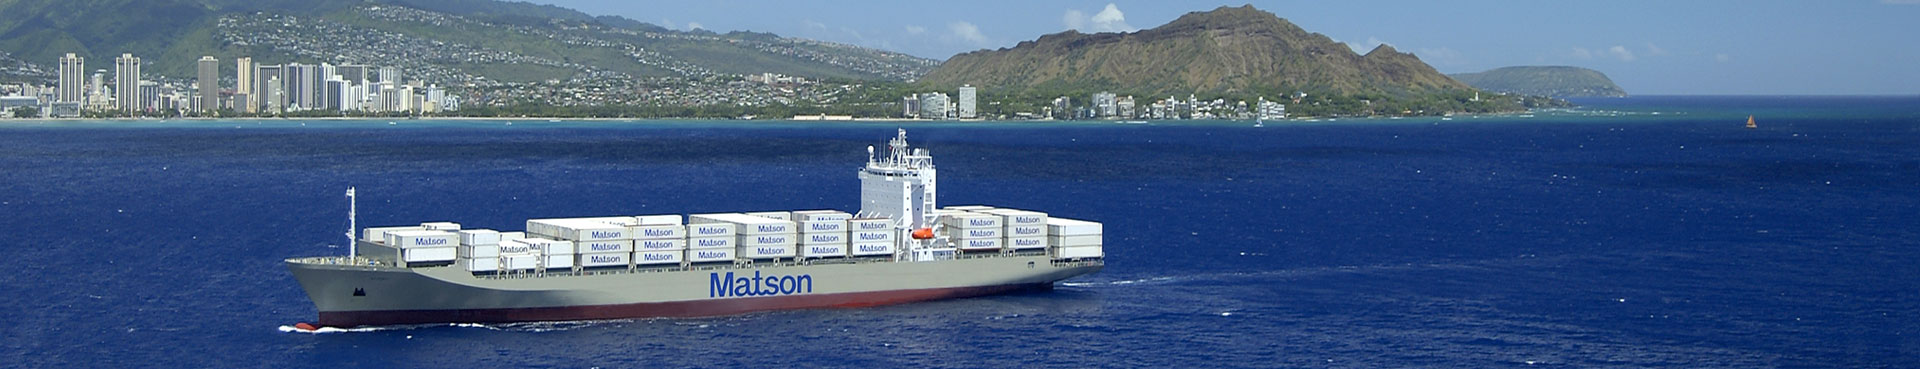 Matson containership arriving Honolulu, Hawaii with containers.